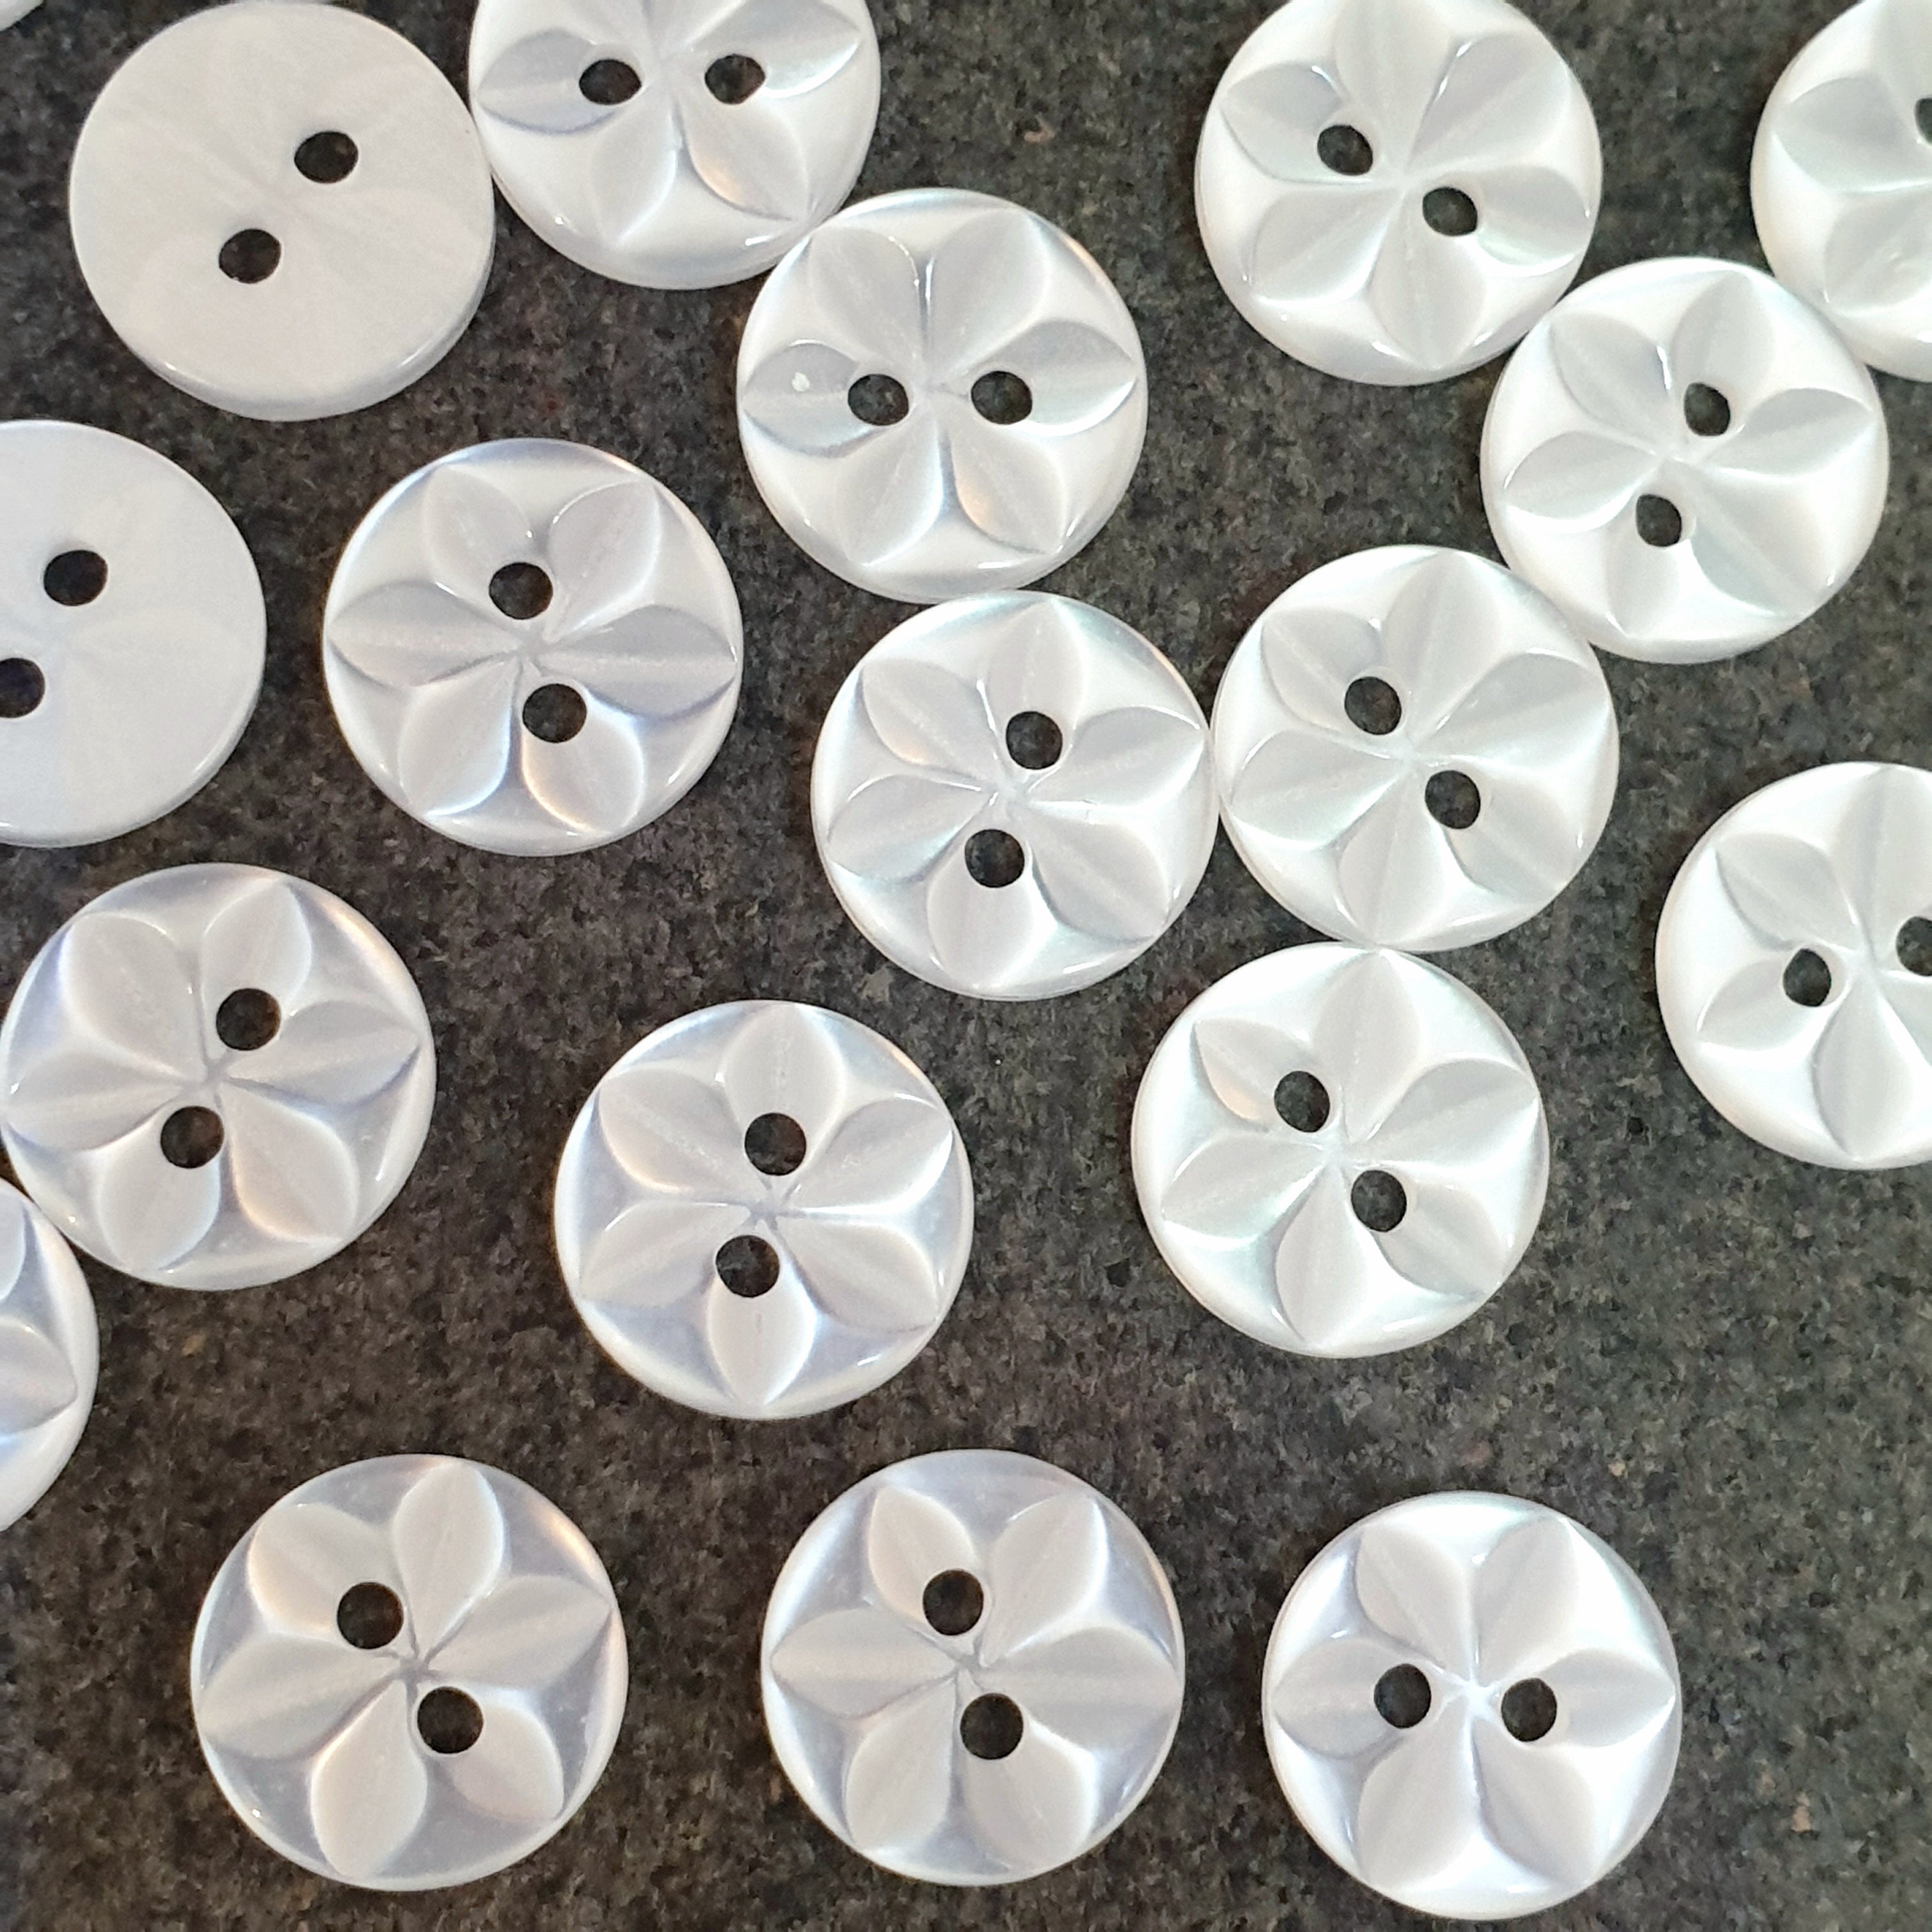 MajorCrafts 40pcs 11mm Pearlescent White Flower 2 Holes Small Round Resin Sewing Buttons